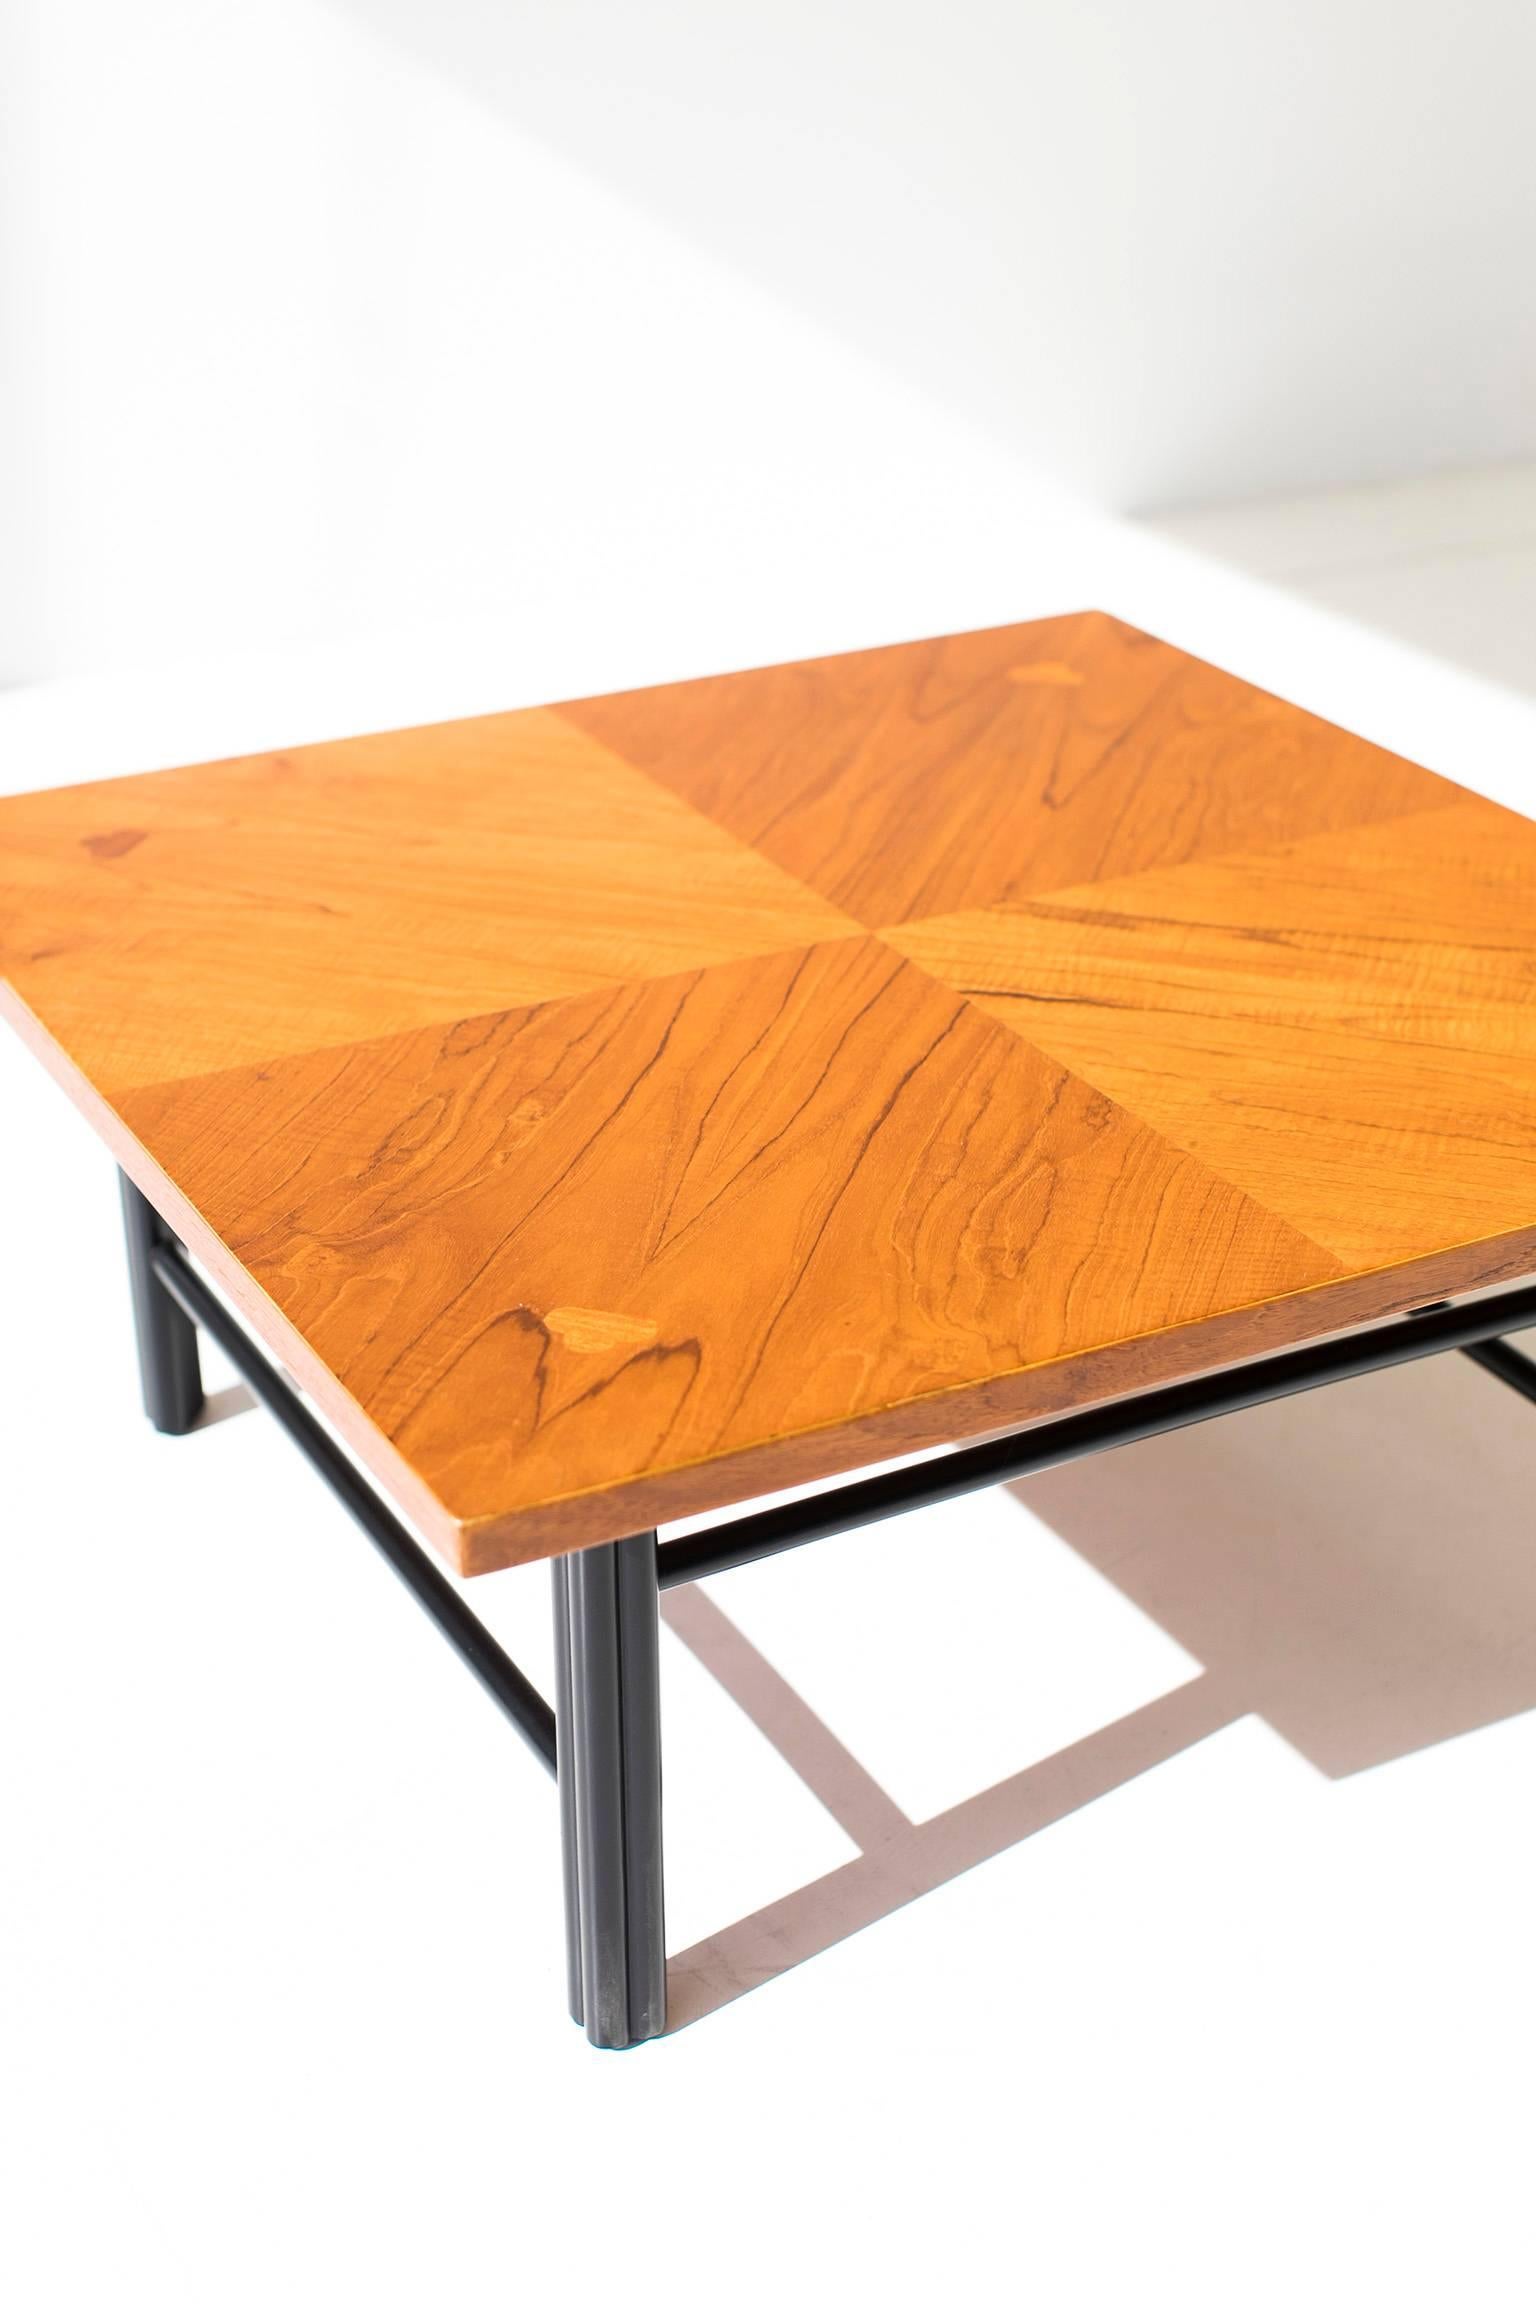 Designer: Attributed to Michael Taylor.

Manufacturer: Baker.
Period or model: Mid-Century Modern.
Specs: Mahogany veneer, bamboo.

Condition: 

This baker coffee table, Far East Collection is in excellent restored condition. This table has